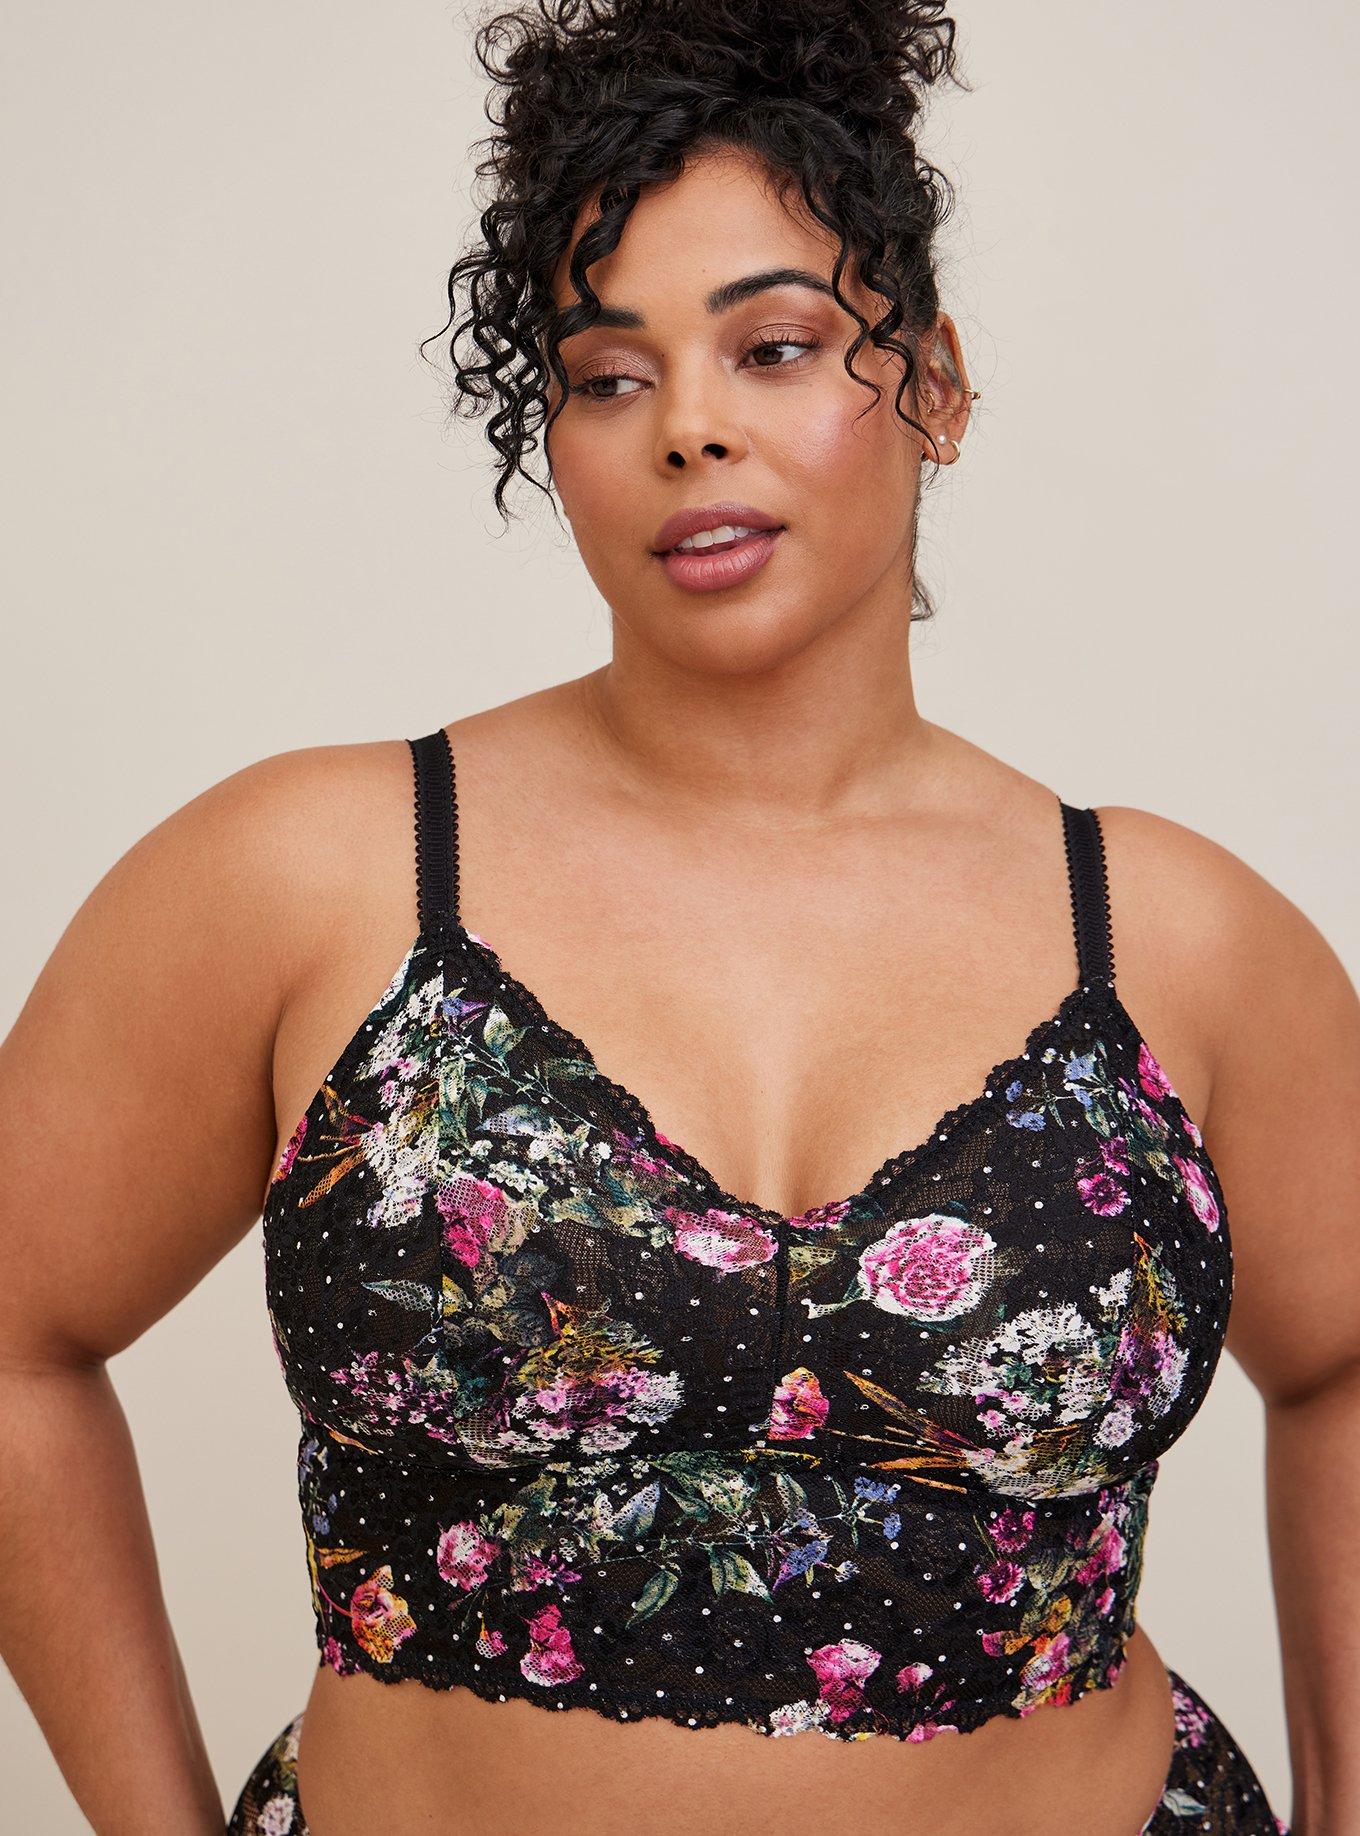 Searching For A Plus Size Bralette…I Found Them At Torrid! – The